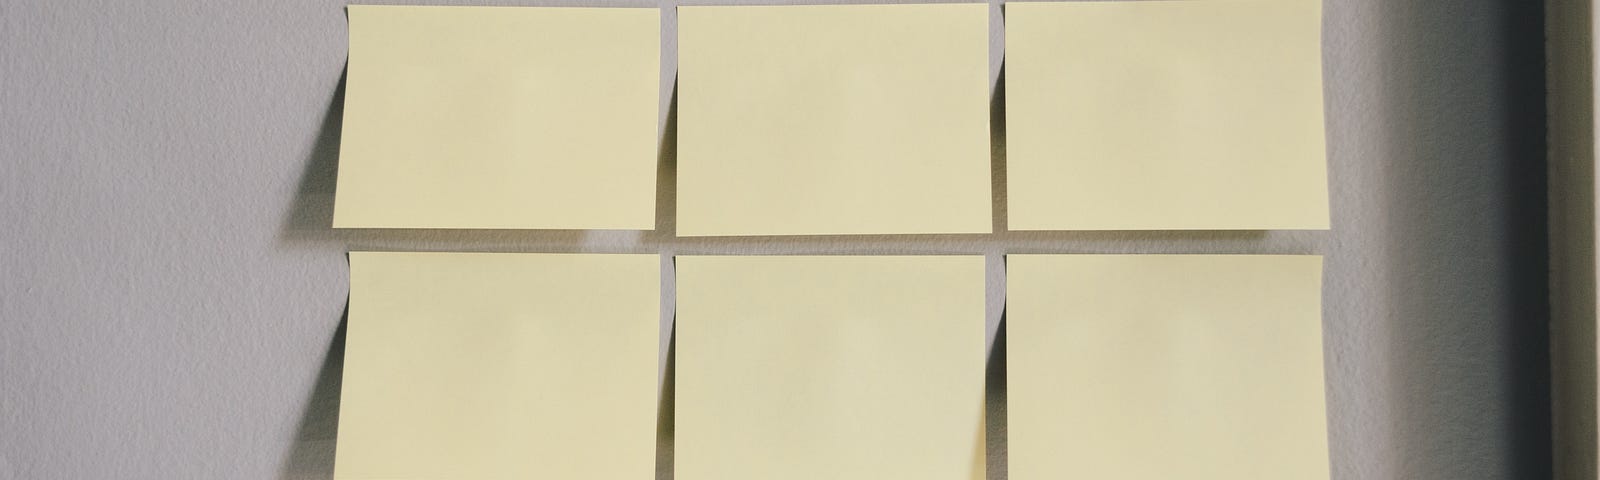 A series of blank post-it notes hanging on a wall with one being removed by a hand wearing dark nail polish.